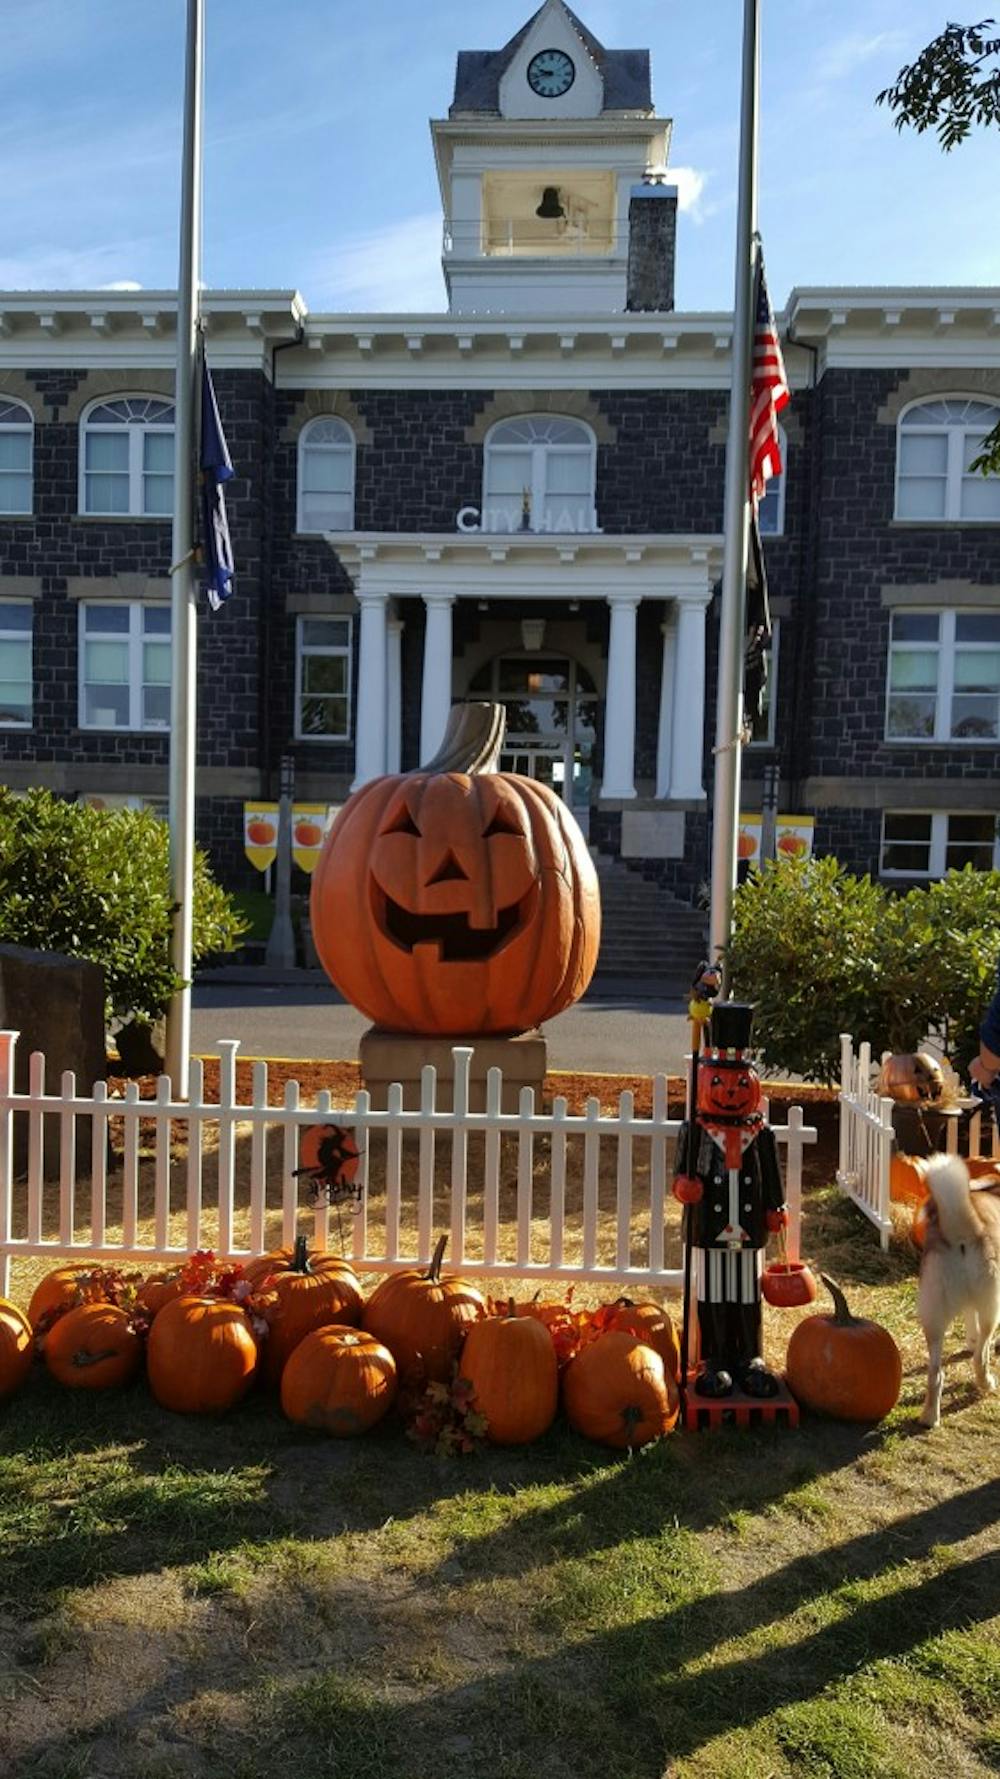 <p>The town square of the 1998 film, Halloweentown.</p>